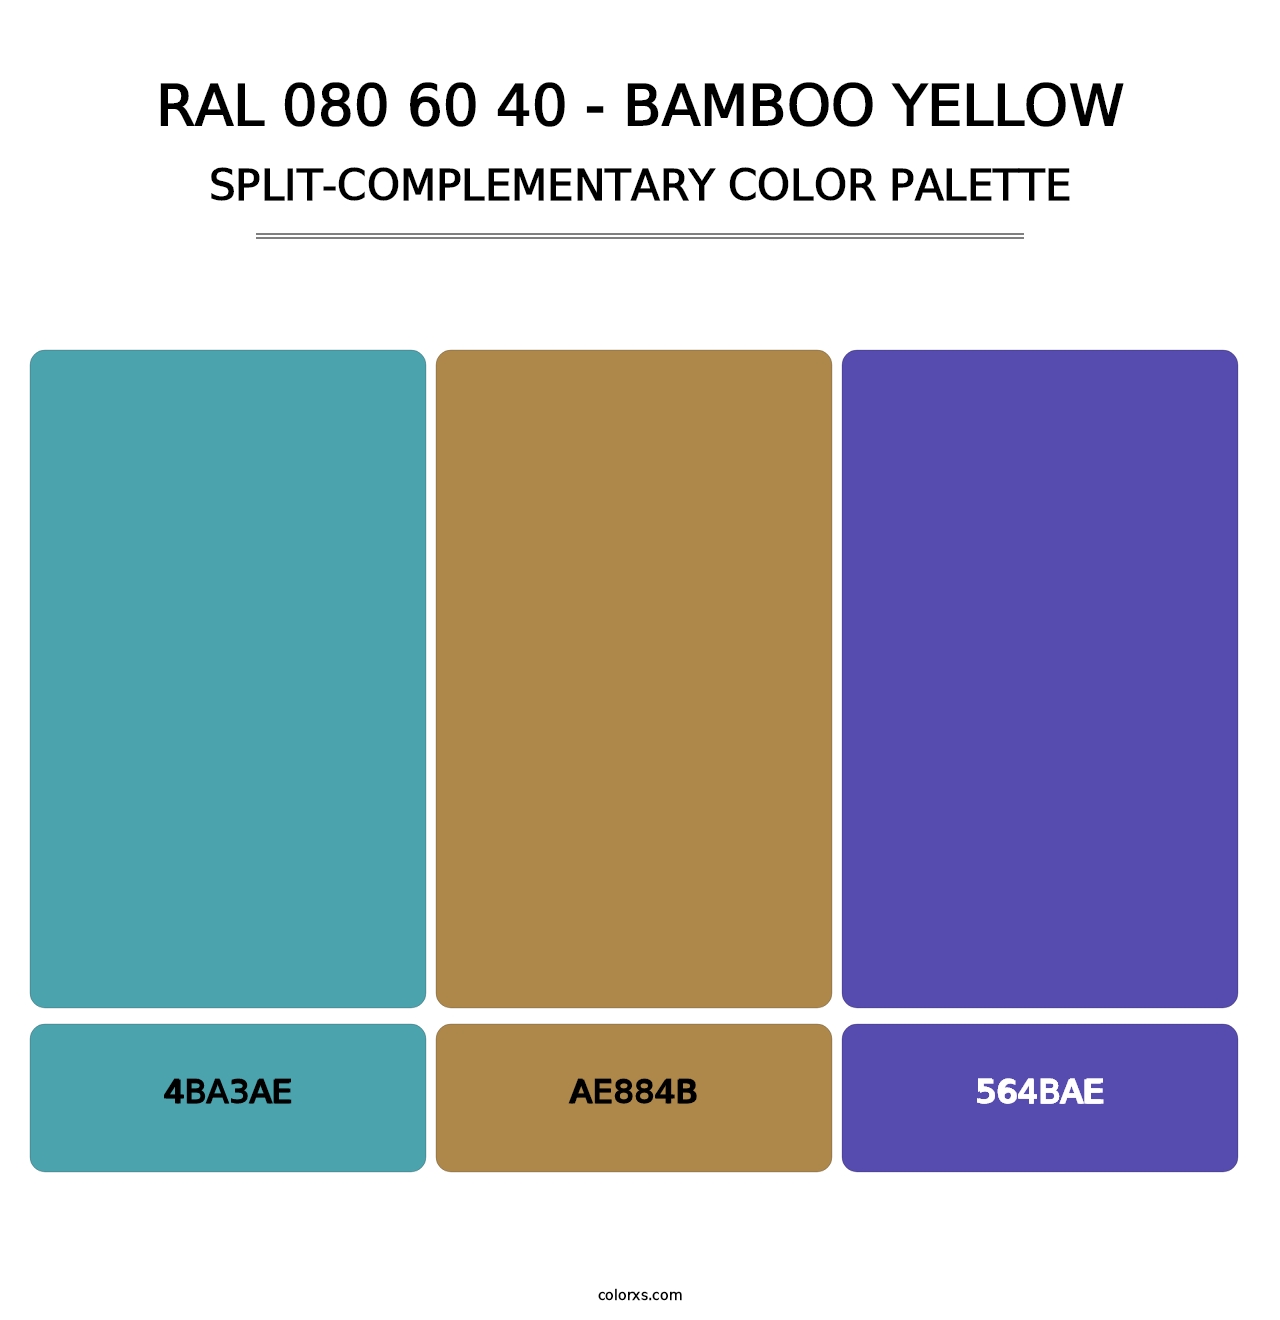 RAL 080 60 40 - Bamboo Yellow - Split-Complementary Color Palette